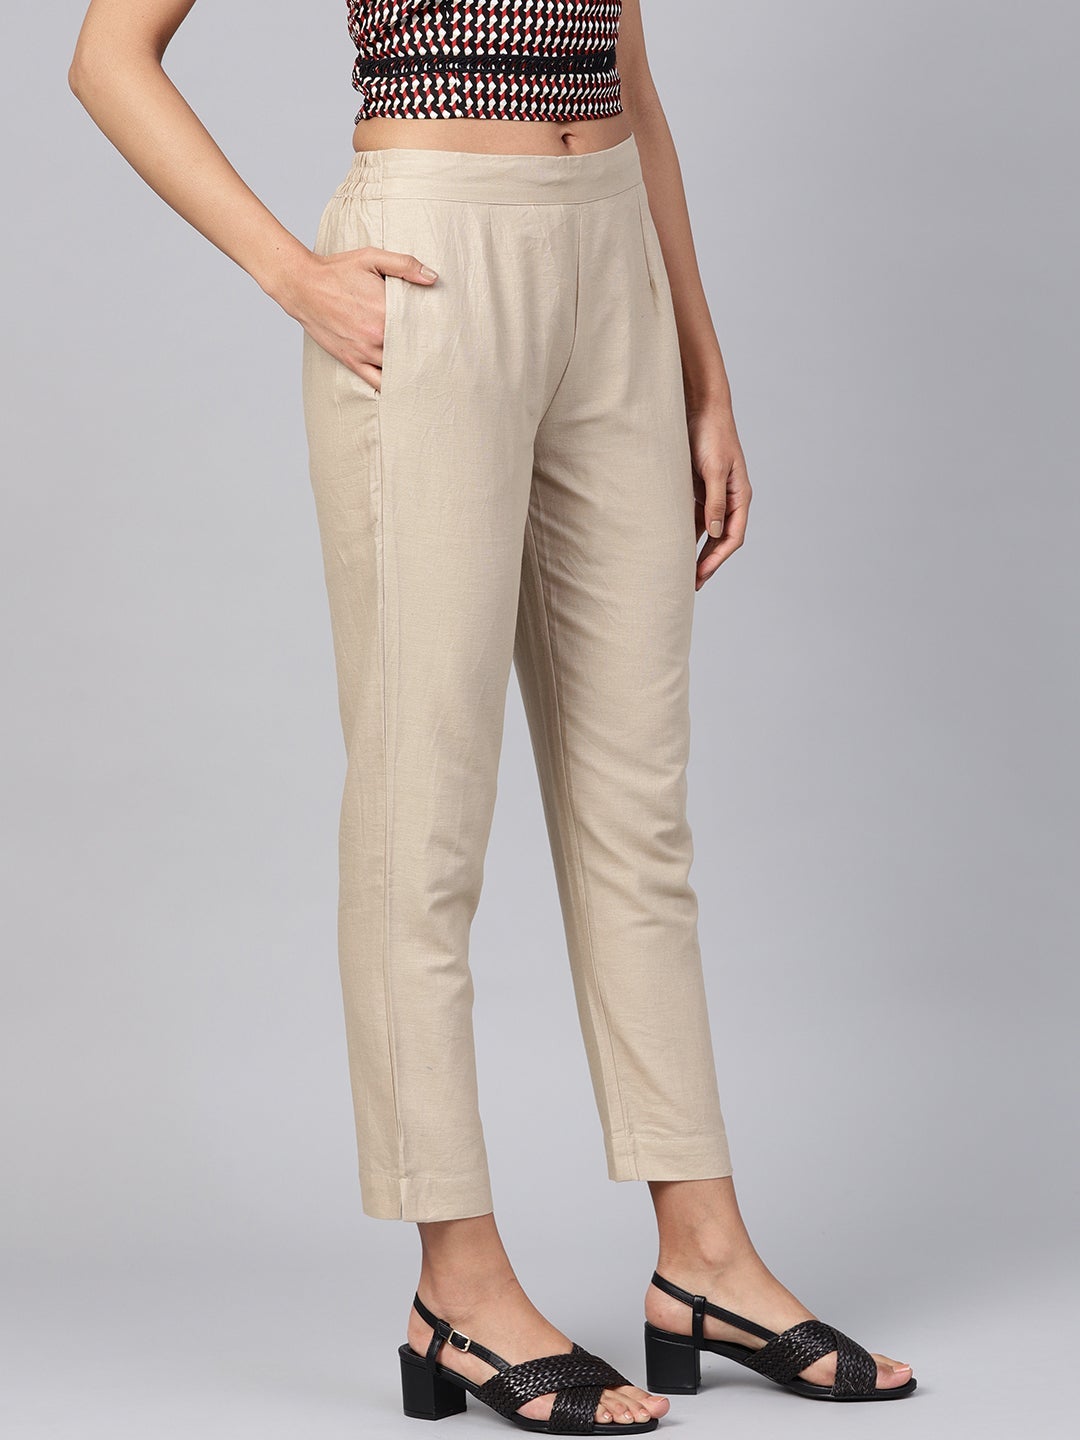 Juniper Sand Grey Solid Cotton Flex Slim Fit Women Pants With Two Pockets